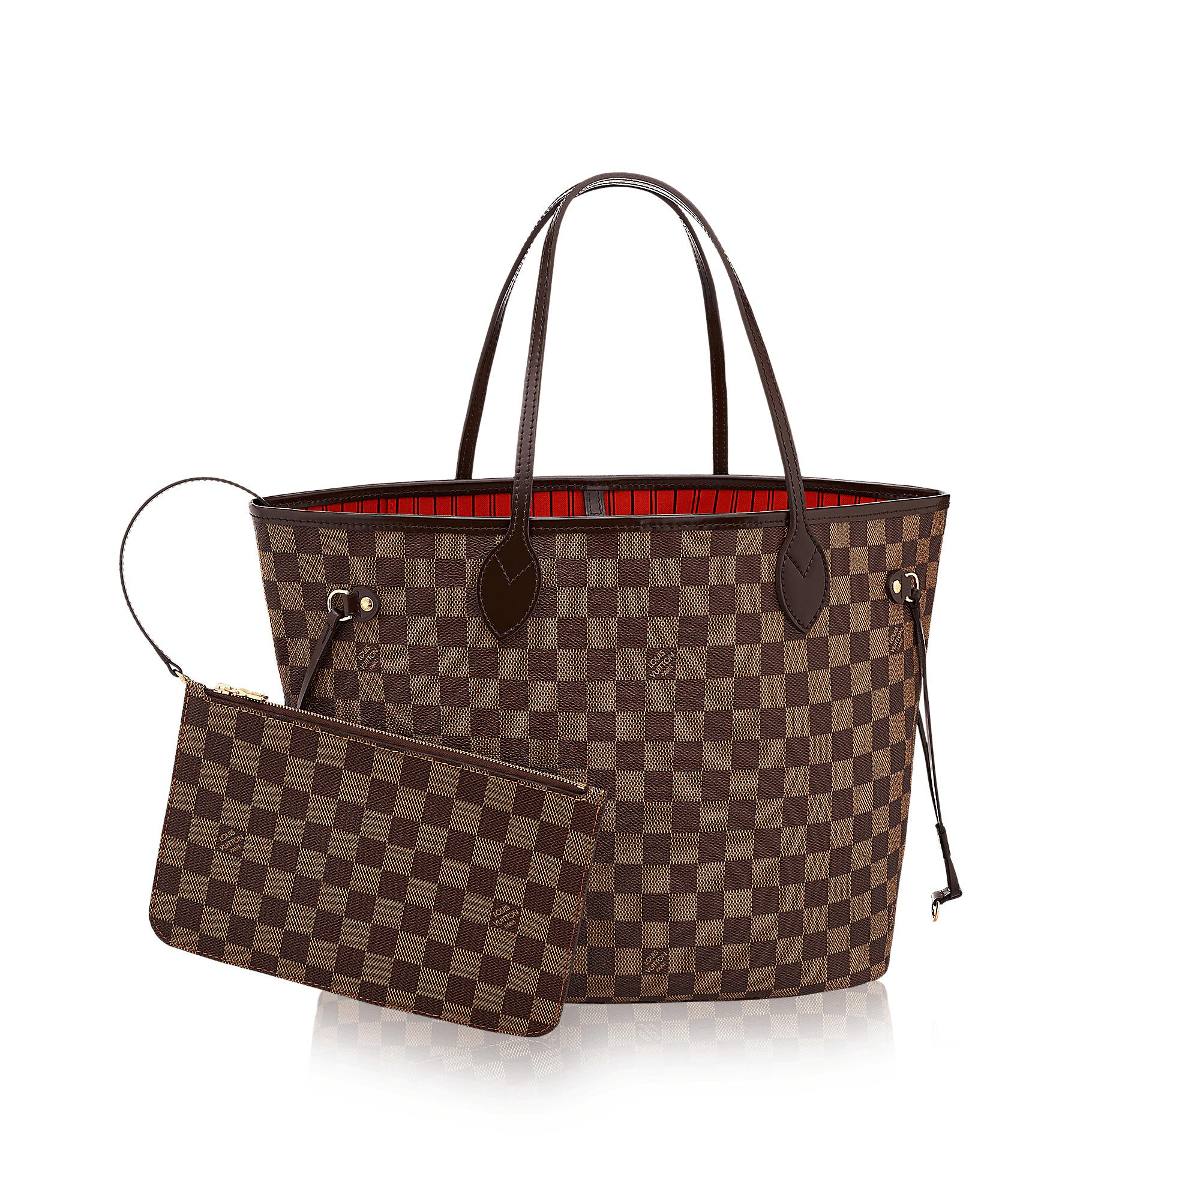 Who makes the best LV bags? : r/RepladiesDesigner